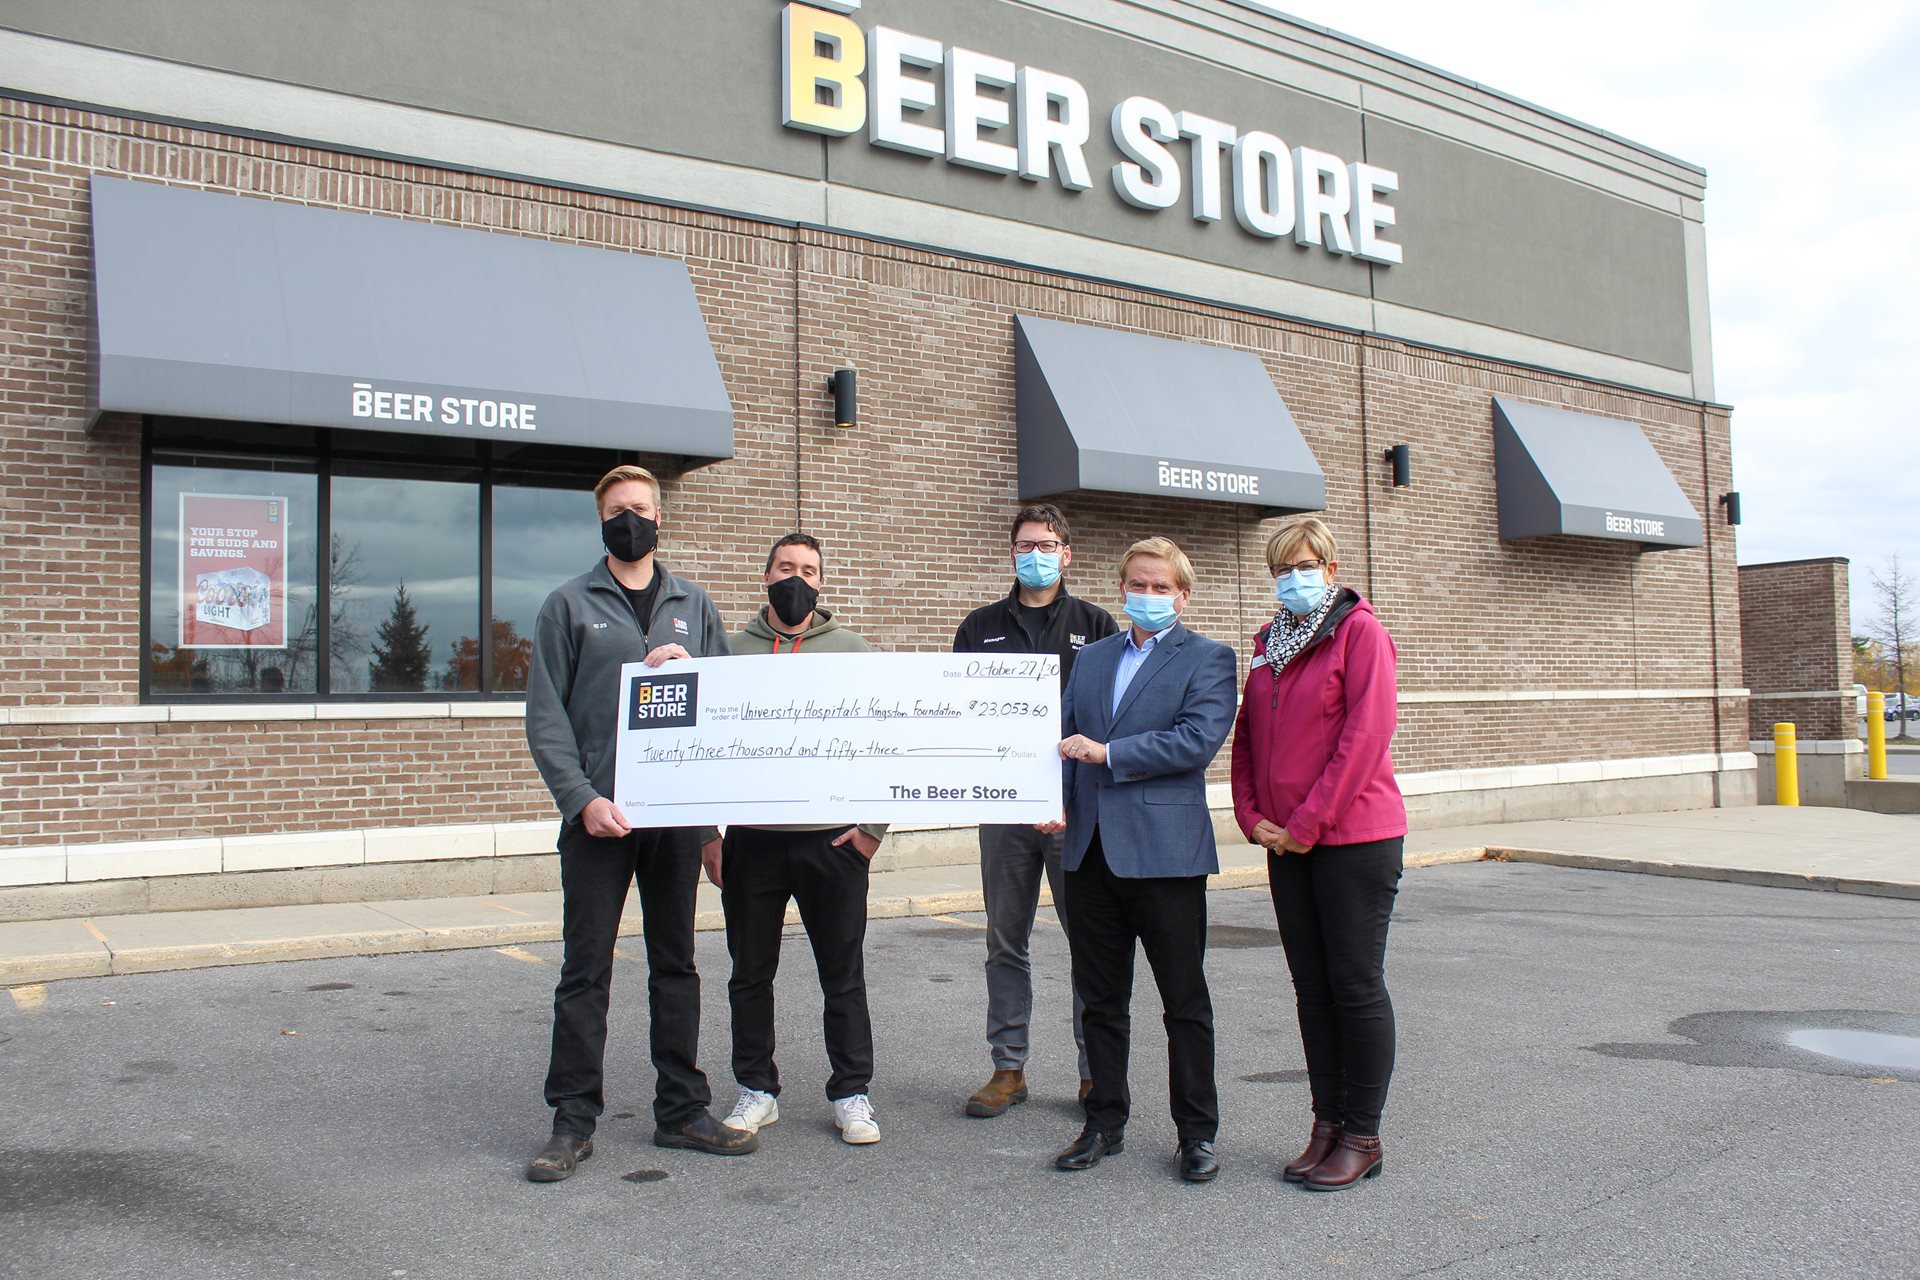 The Beer Store raises more than $23,000 for Kingston Health Sciences Centre Image